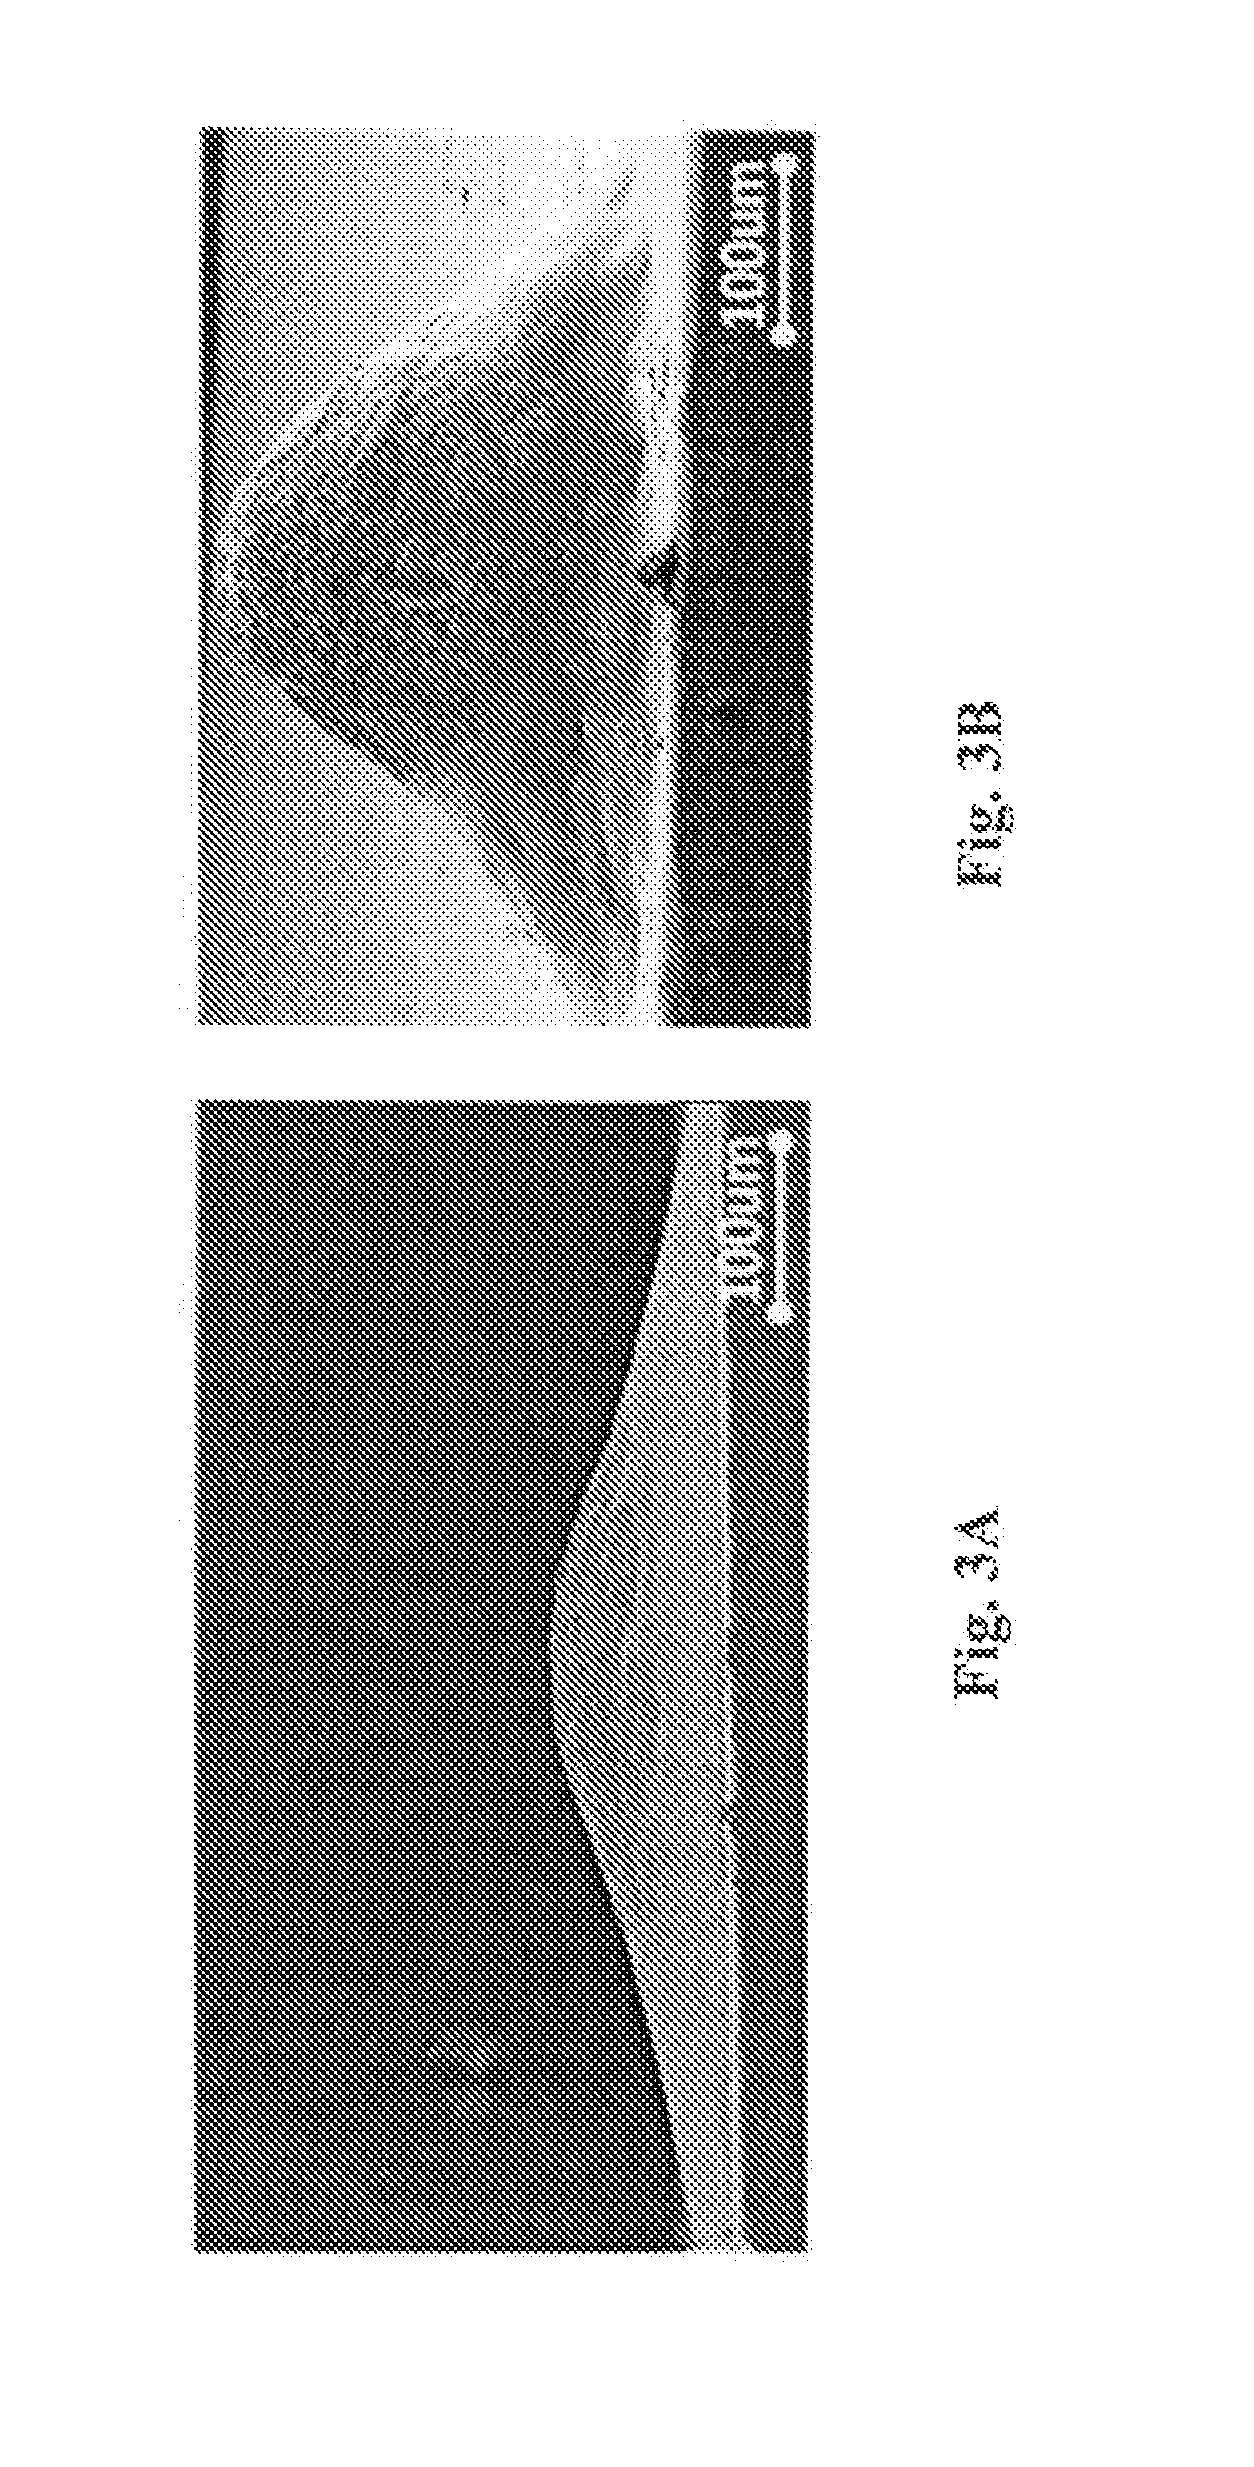 Three-dimensional conductive patterns and inks for making same